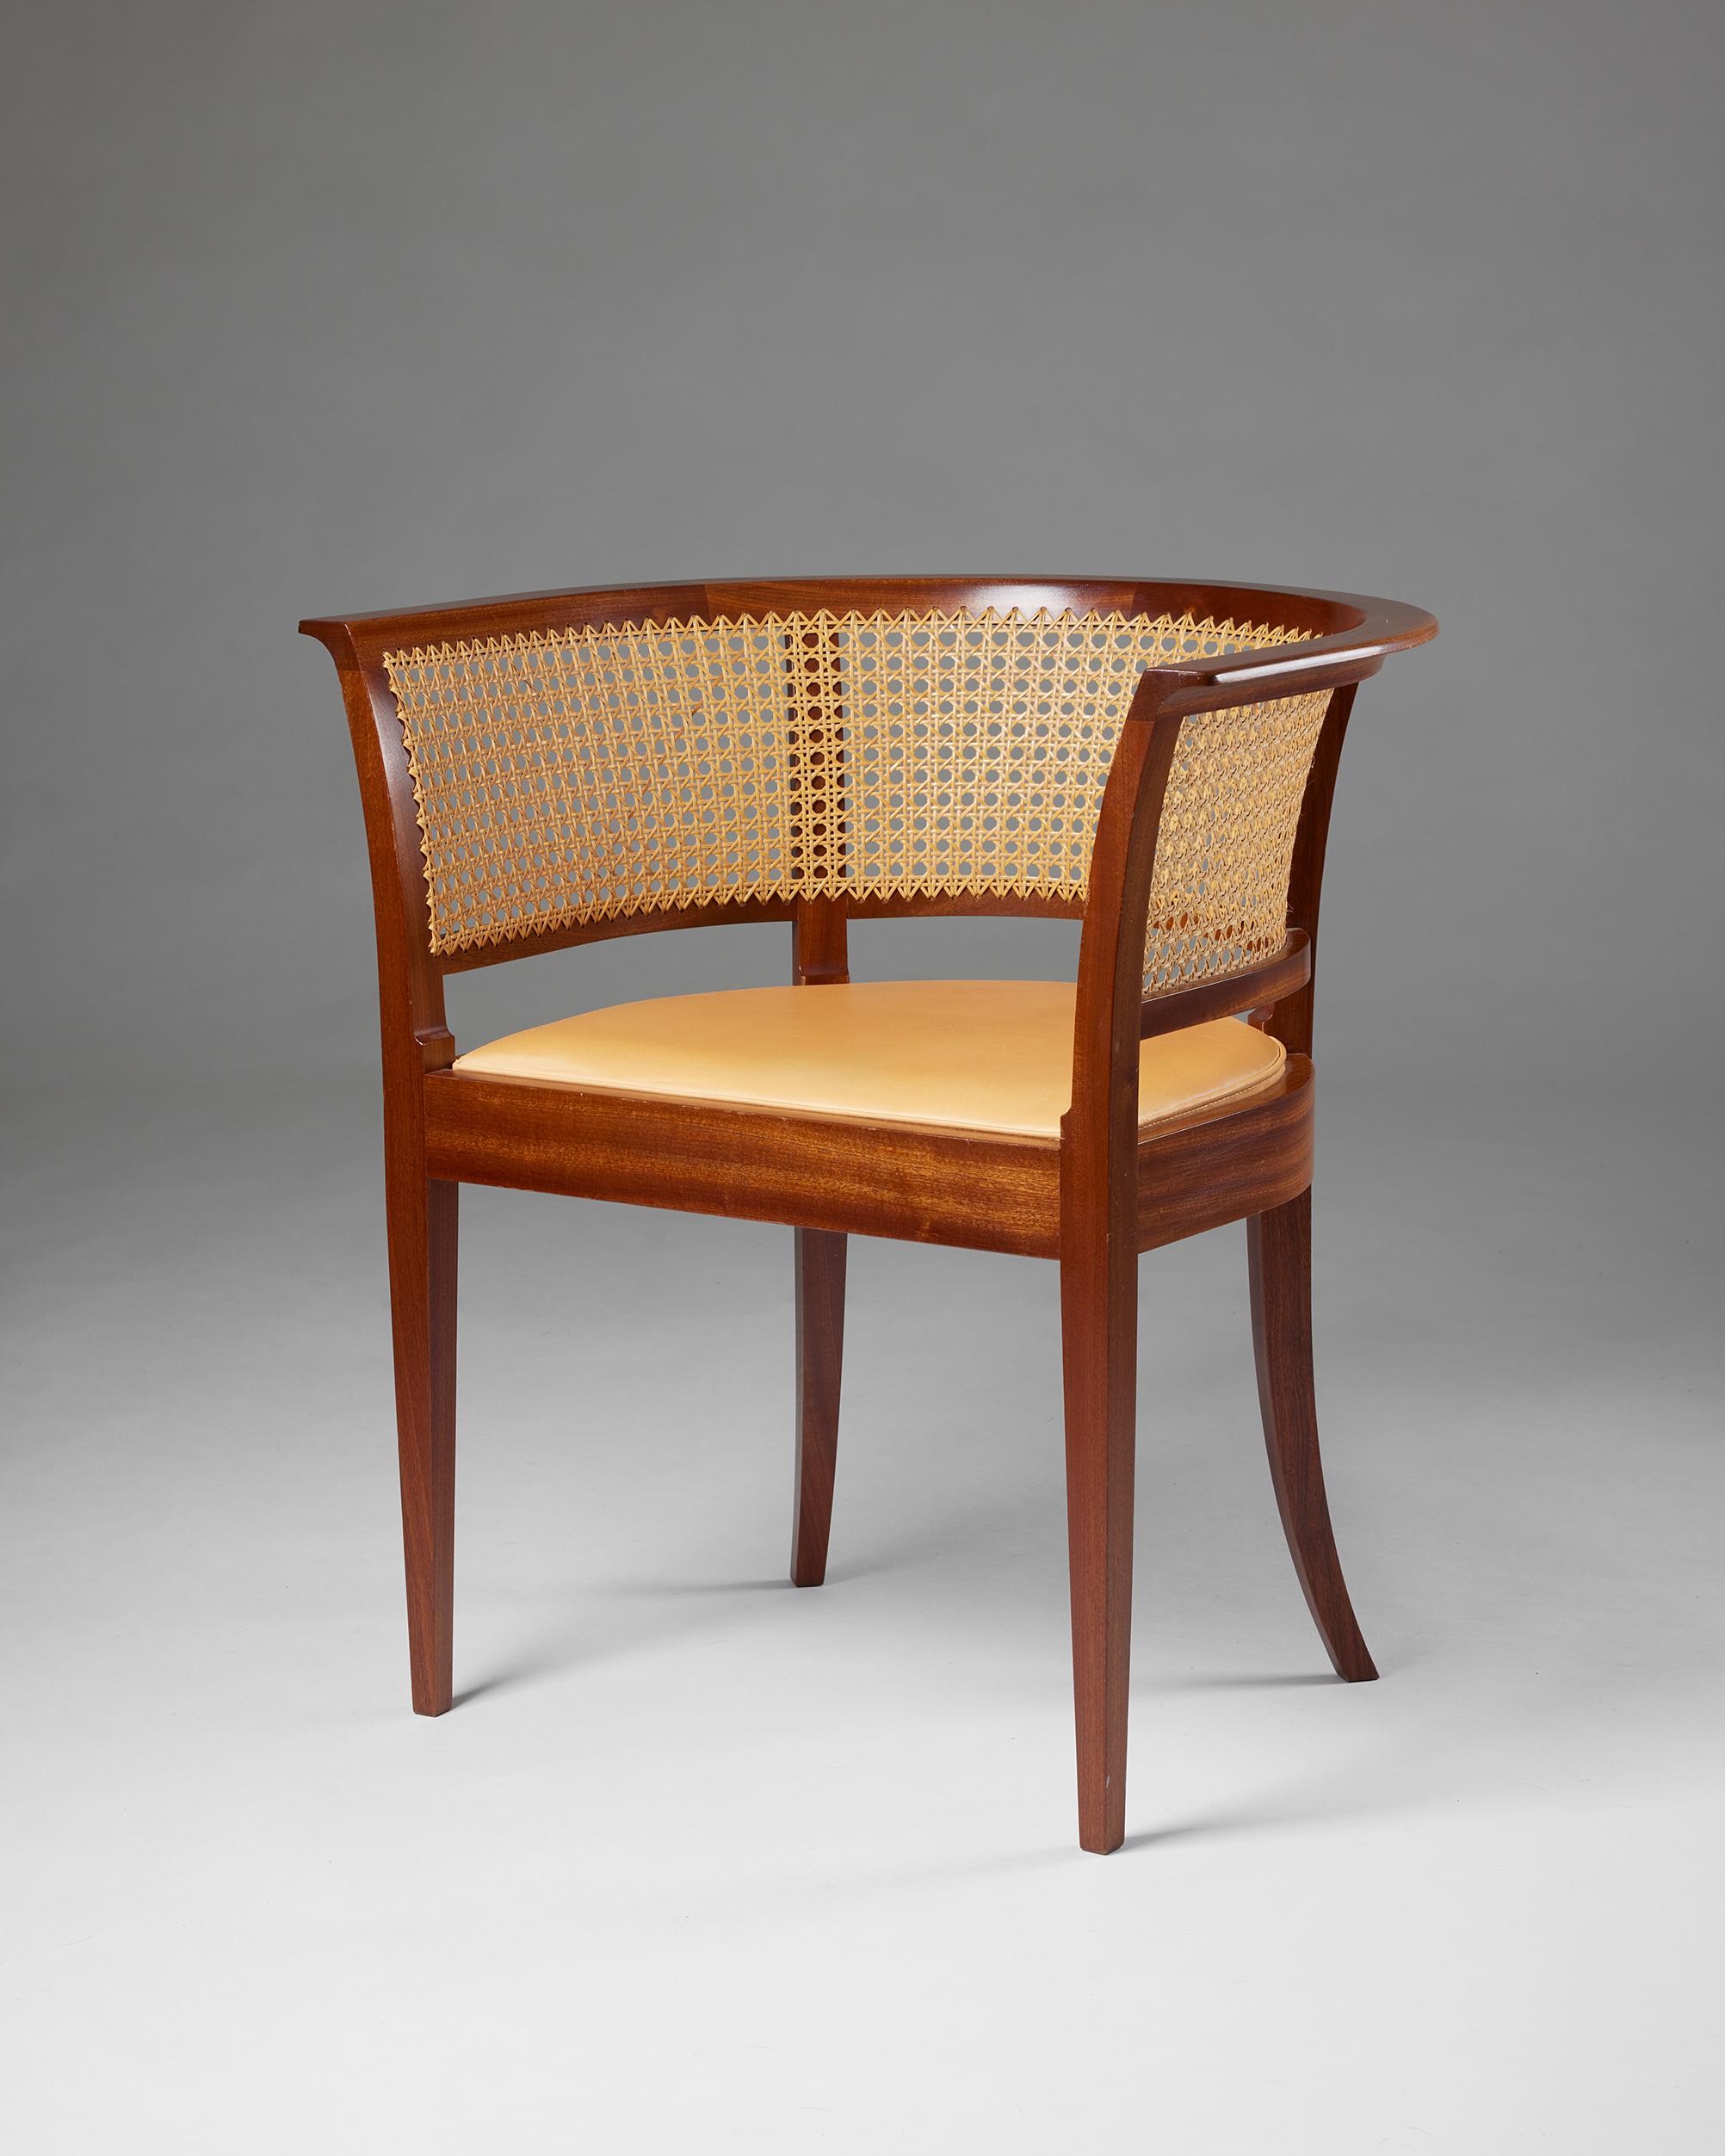 The Faaborg Chair’ designed by Kaare Klint for Rud. Rasmussen Cabinetmakers
Denmark, 1914.

Mahogany, woven cane, and leather.

Designed in 1914 for the Faaborg Museum. This example was made in the 1960s.

H: 73 cm
W: 69 cm
D: 54 cm
Seat H: 45